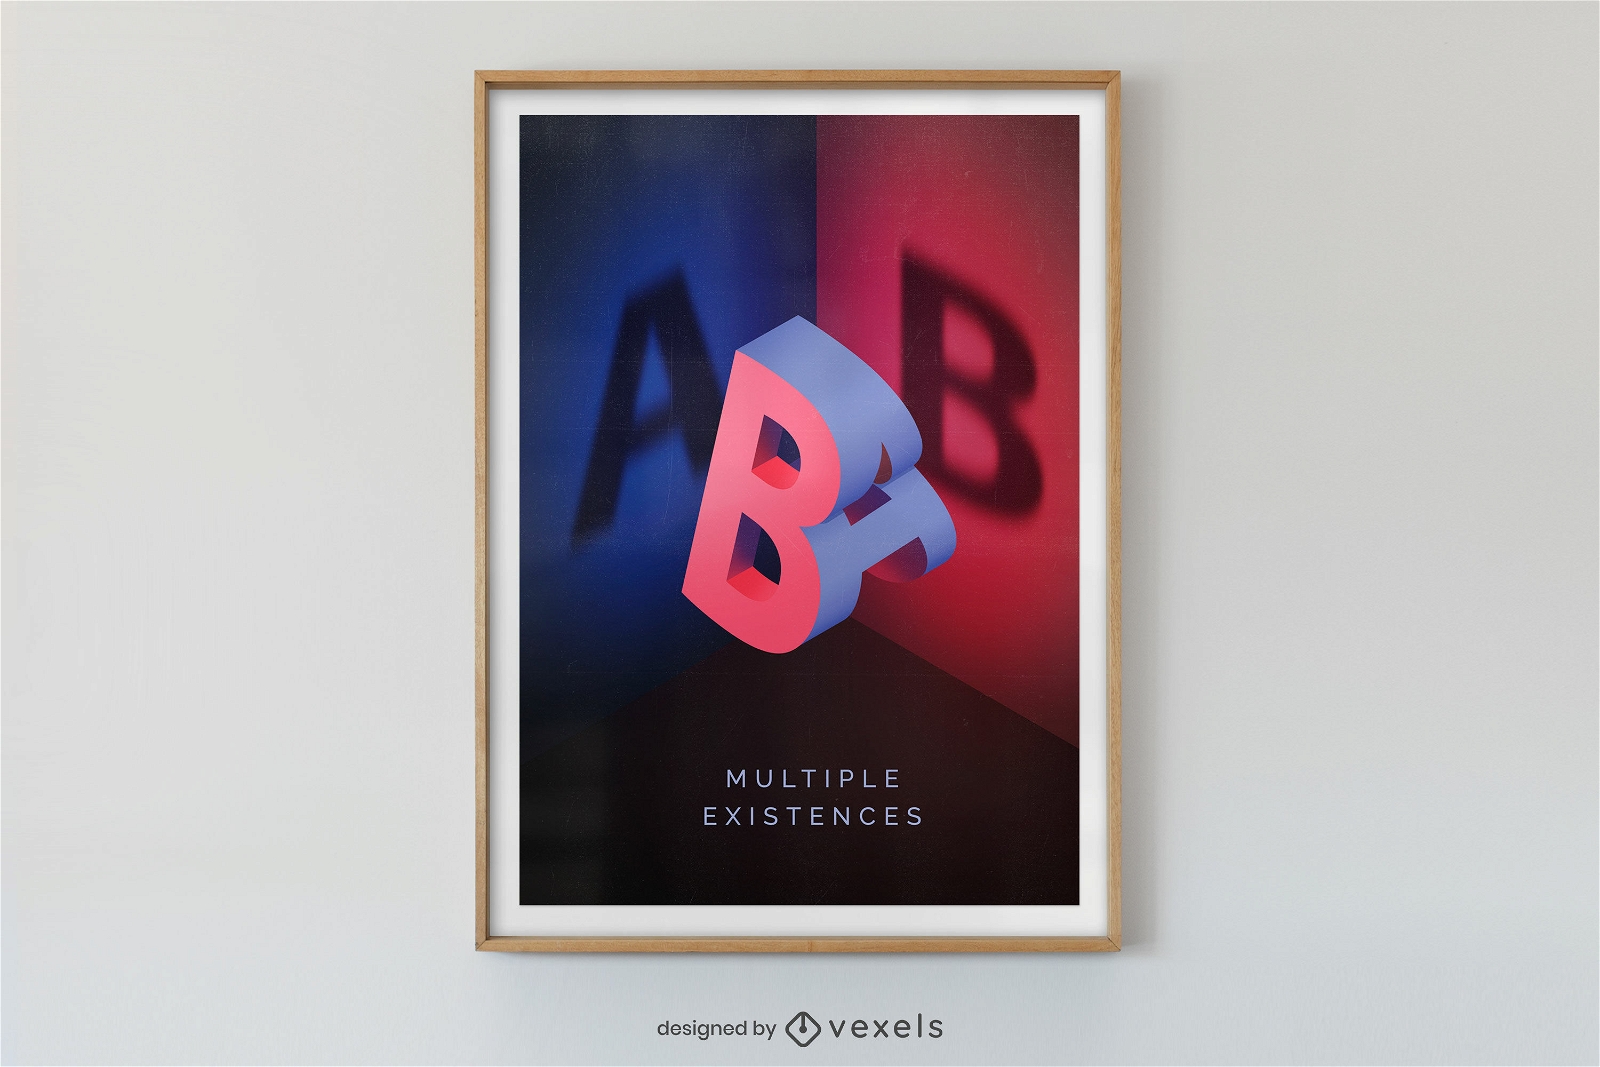 A and B 3D illusion effect poster design